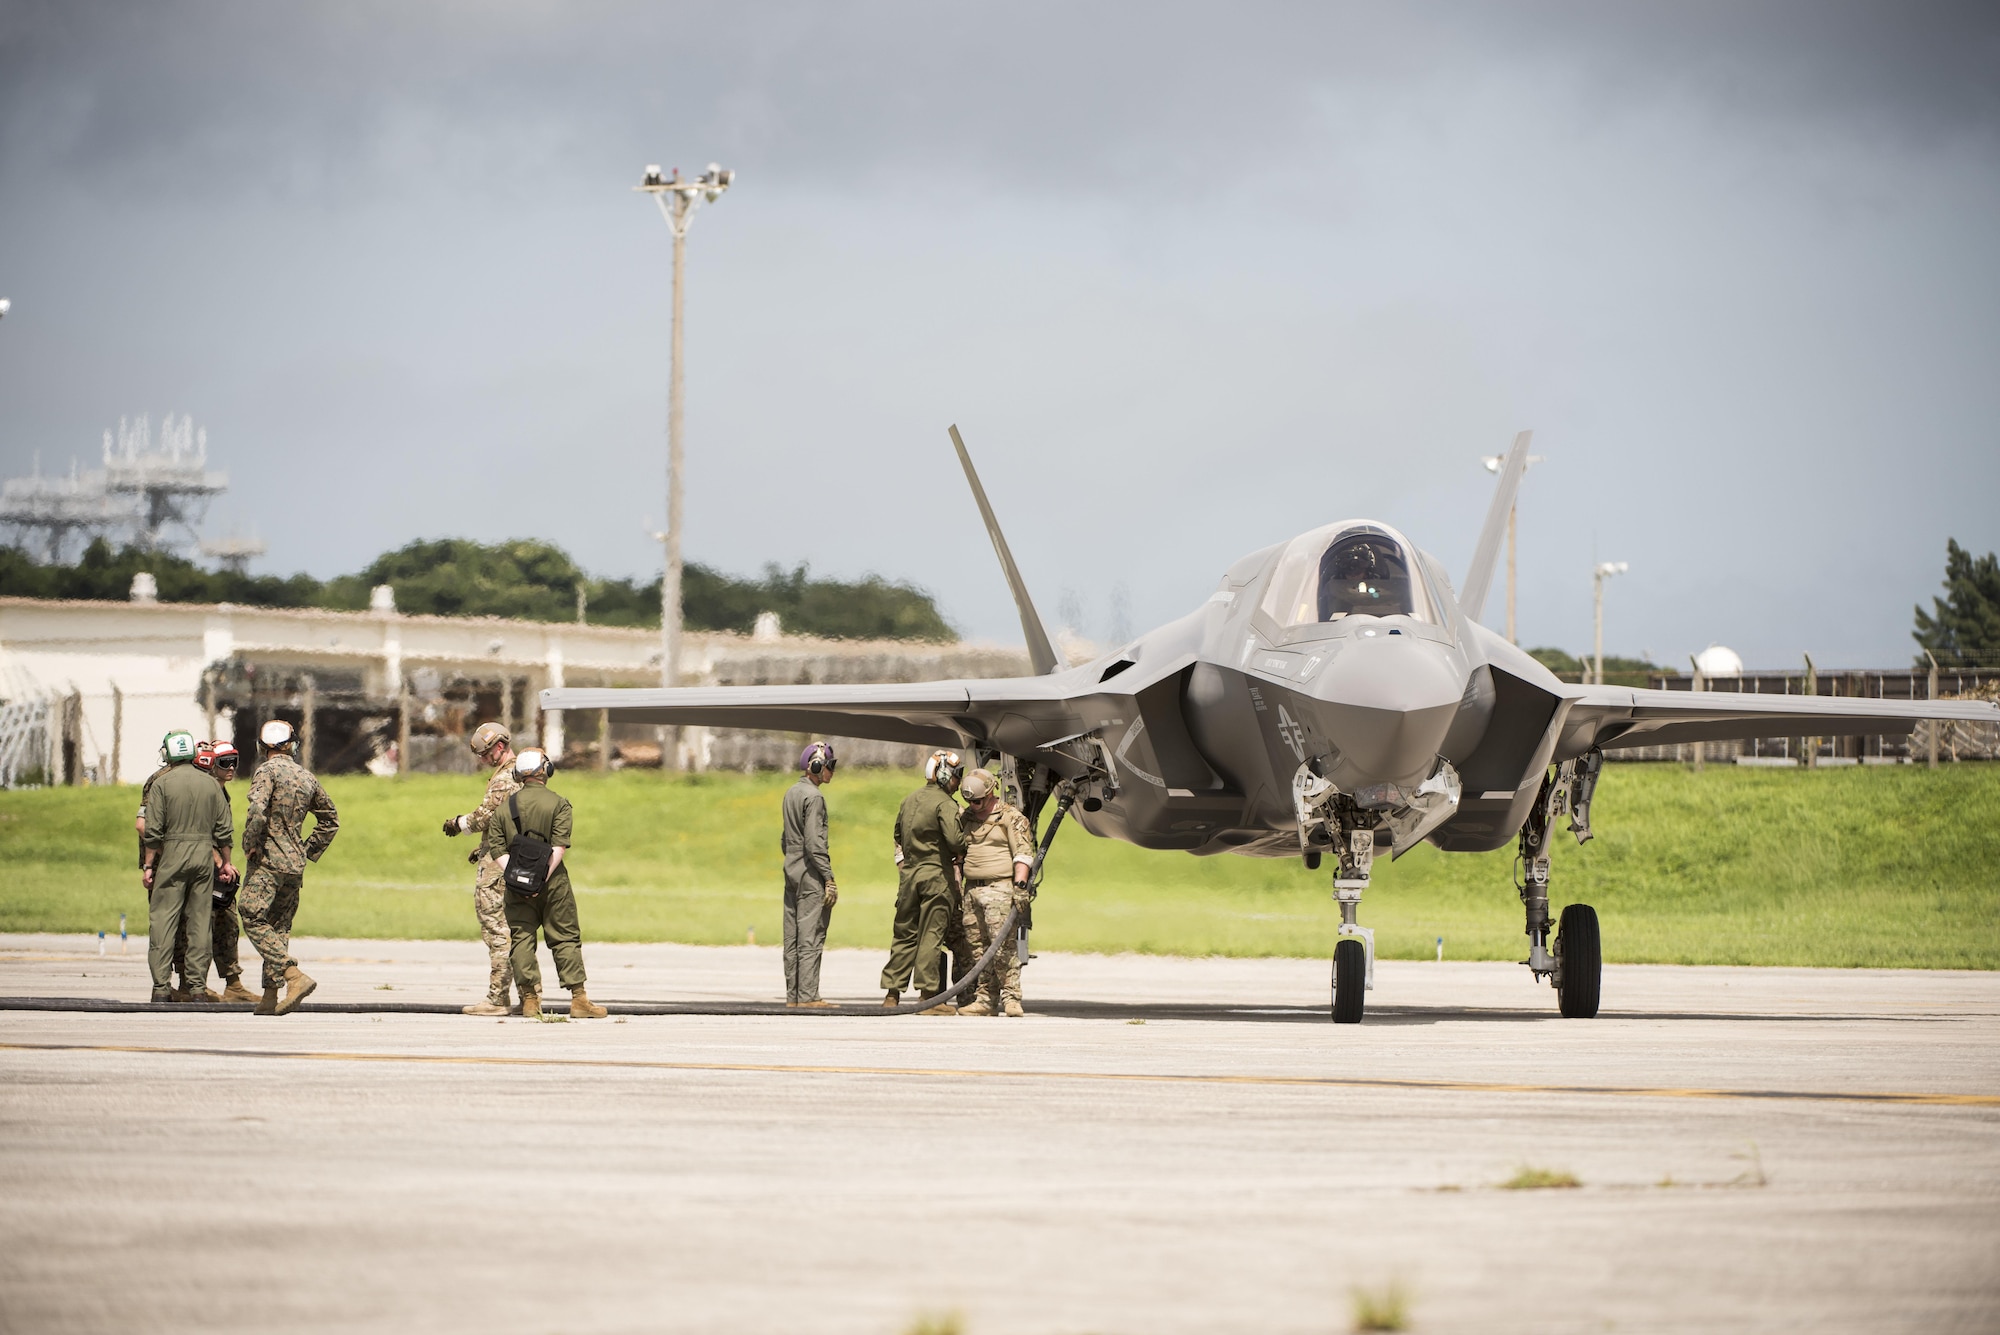 U.S. Air Force 353rd Special Operations Group, 18th Logistics Readiness Squadron, and Marine Wing Support Squadron 172 refueling teams refuel a Marine Fighter Attack Squadron 121 F-35B Lightning II during a forward area refueling point joint training exercise June 27, 2017, at Kadena Air Base, Japan. FARP enables the Air Force to perform a wide range of missions across multiple domains and brings the most advanced technologies and capabilities of the U.S. military to the region by enabling aircraft to land, refuel and take off again.  (U.S. Air Force photo by Senior Airman Omari Bernard)